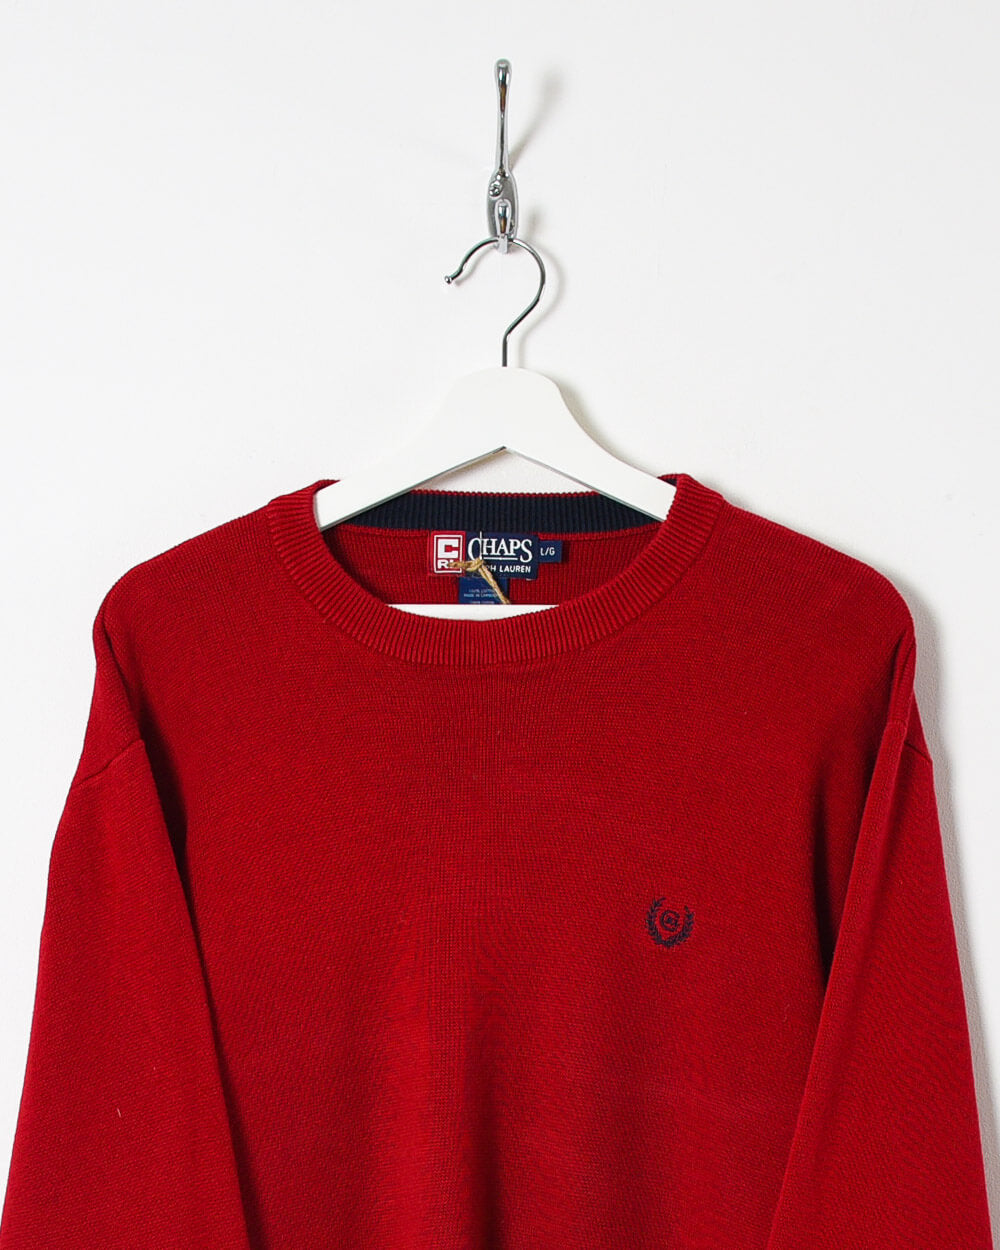 Ralph Lauren Chaps Knitted Sweatshirt - Large - Domno Vintage 90s, 80s, 00s Retro and Vintage Clothing 